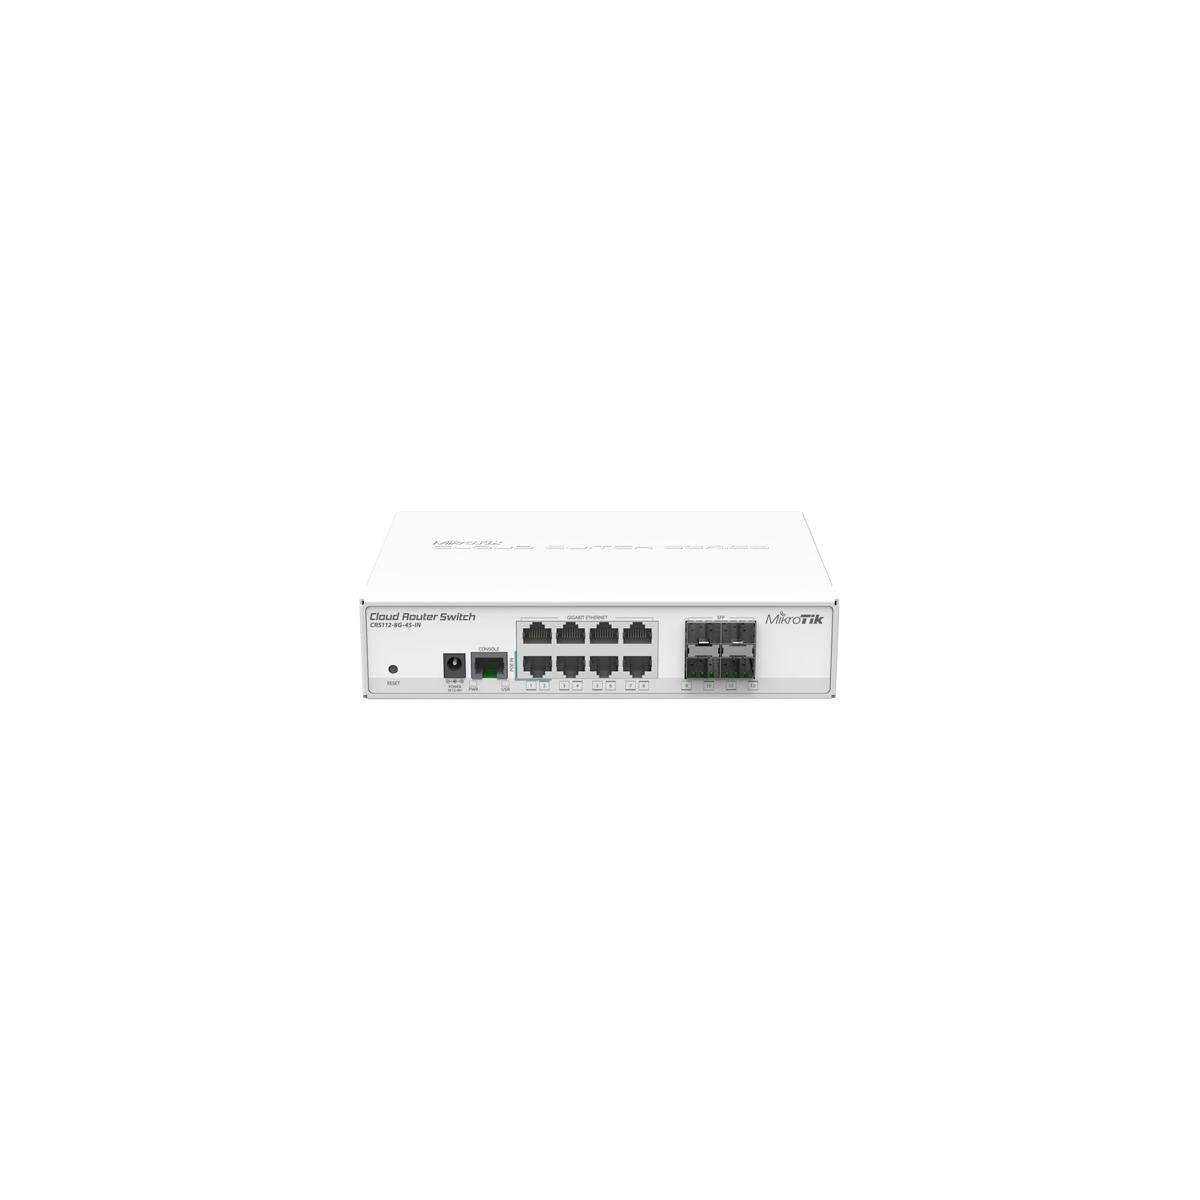 MikroTik CRS112-8G-4S-IN - 400 MHz, 128 MB, 8-Port, 4 SFP, Router OS 5 Netzwerk-Switch